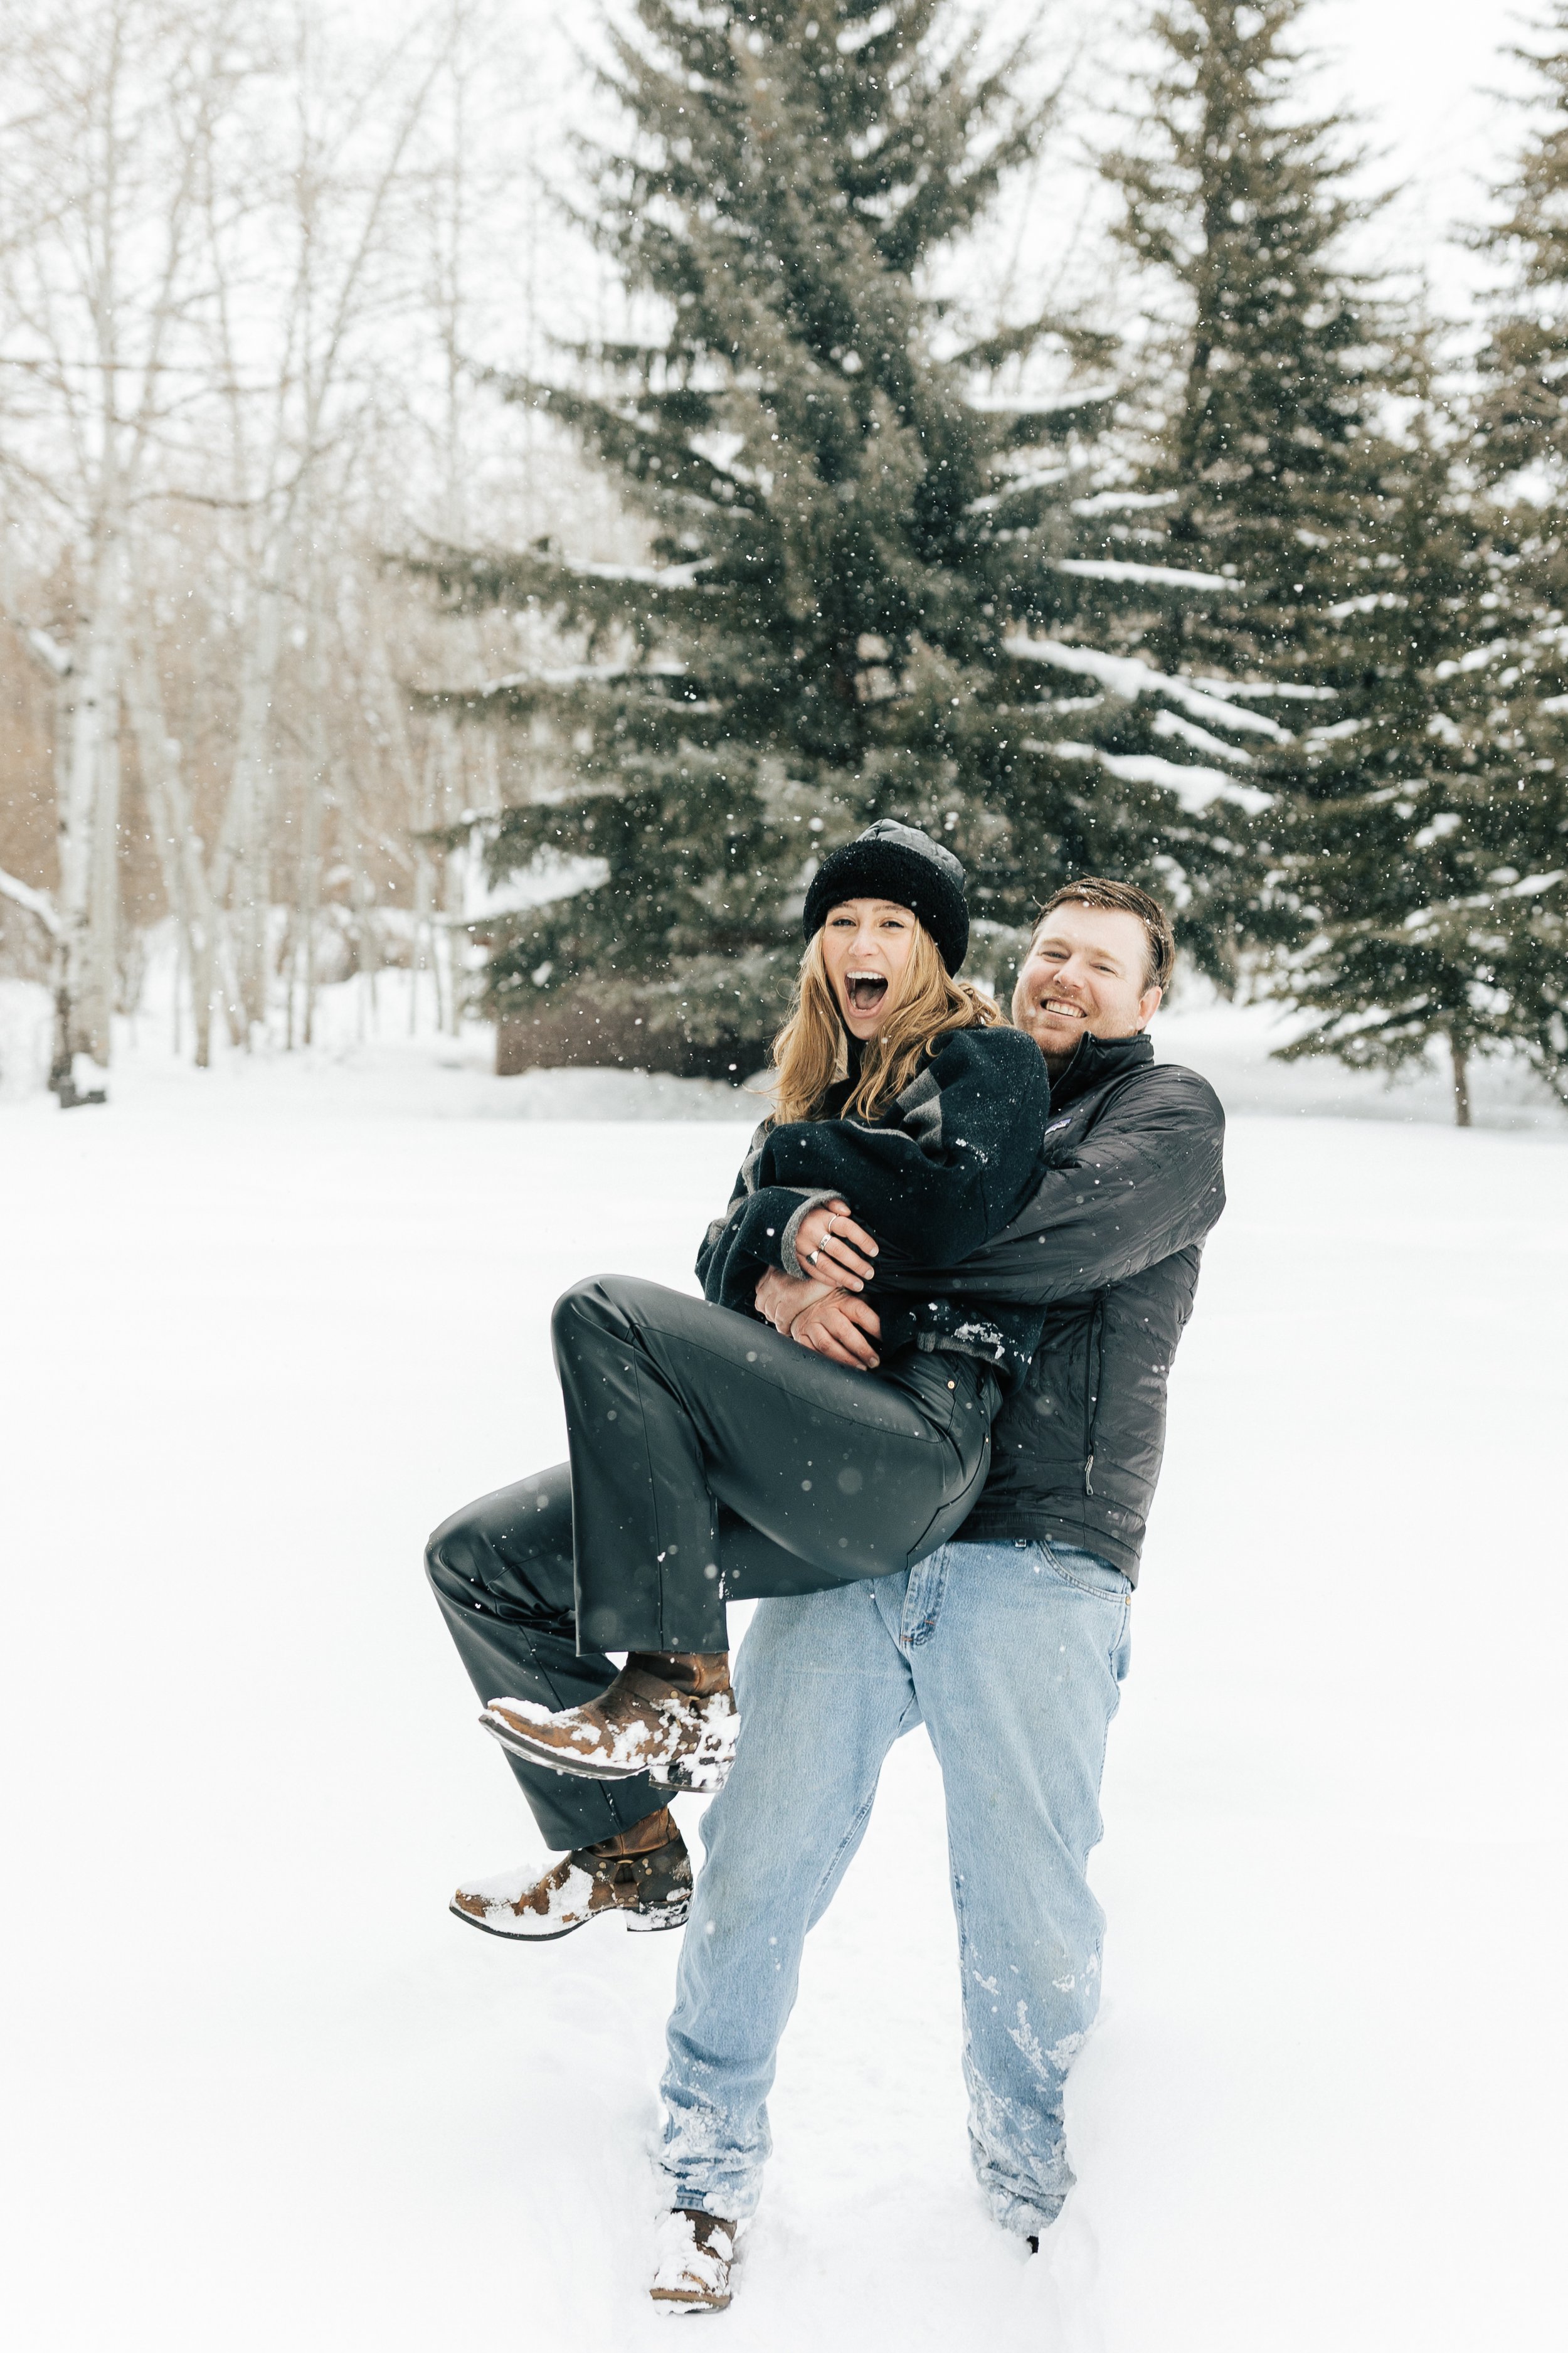  Winter engagement session in Park City, Utah. Boyfriend surprises girlfriend with wedding proposal during a snowy photoshoot. Man proposes to girlfriend. Photoshoot posing ideas. #parkcity #engagements #engagementsessionn #proposal 